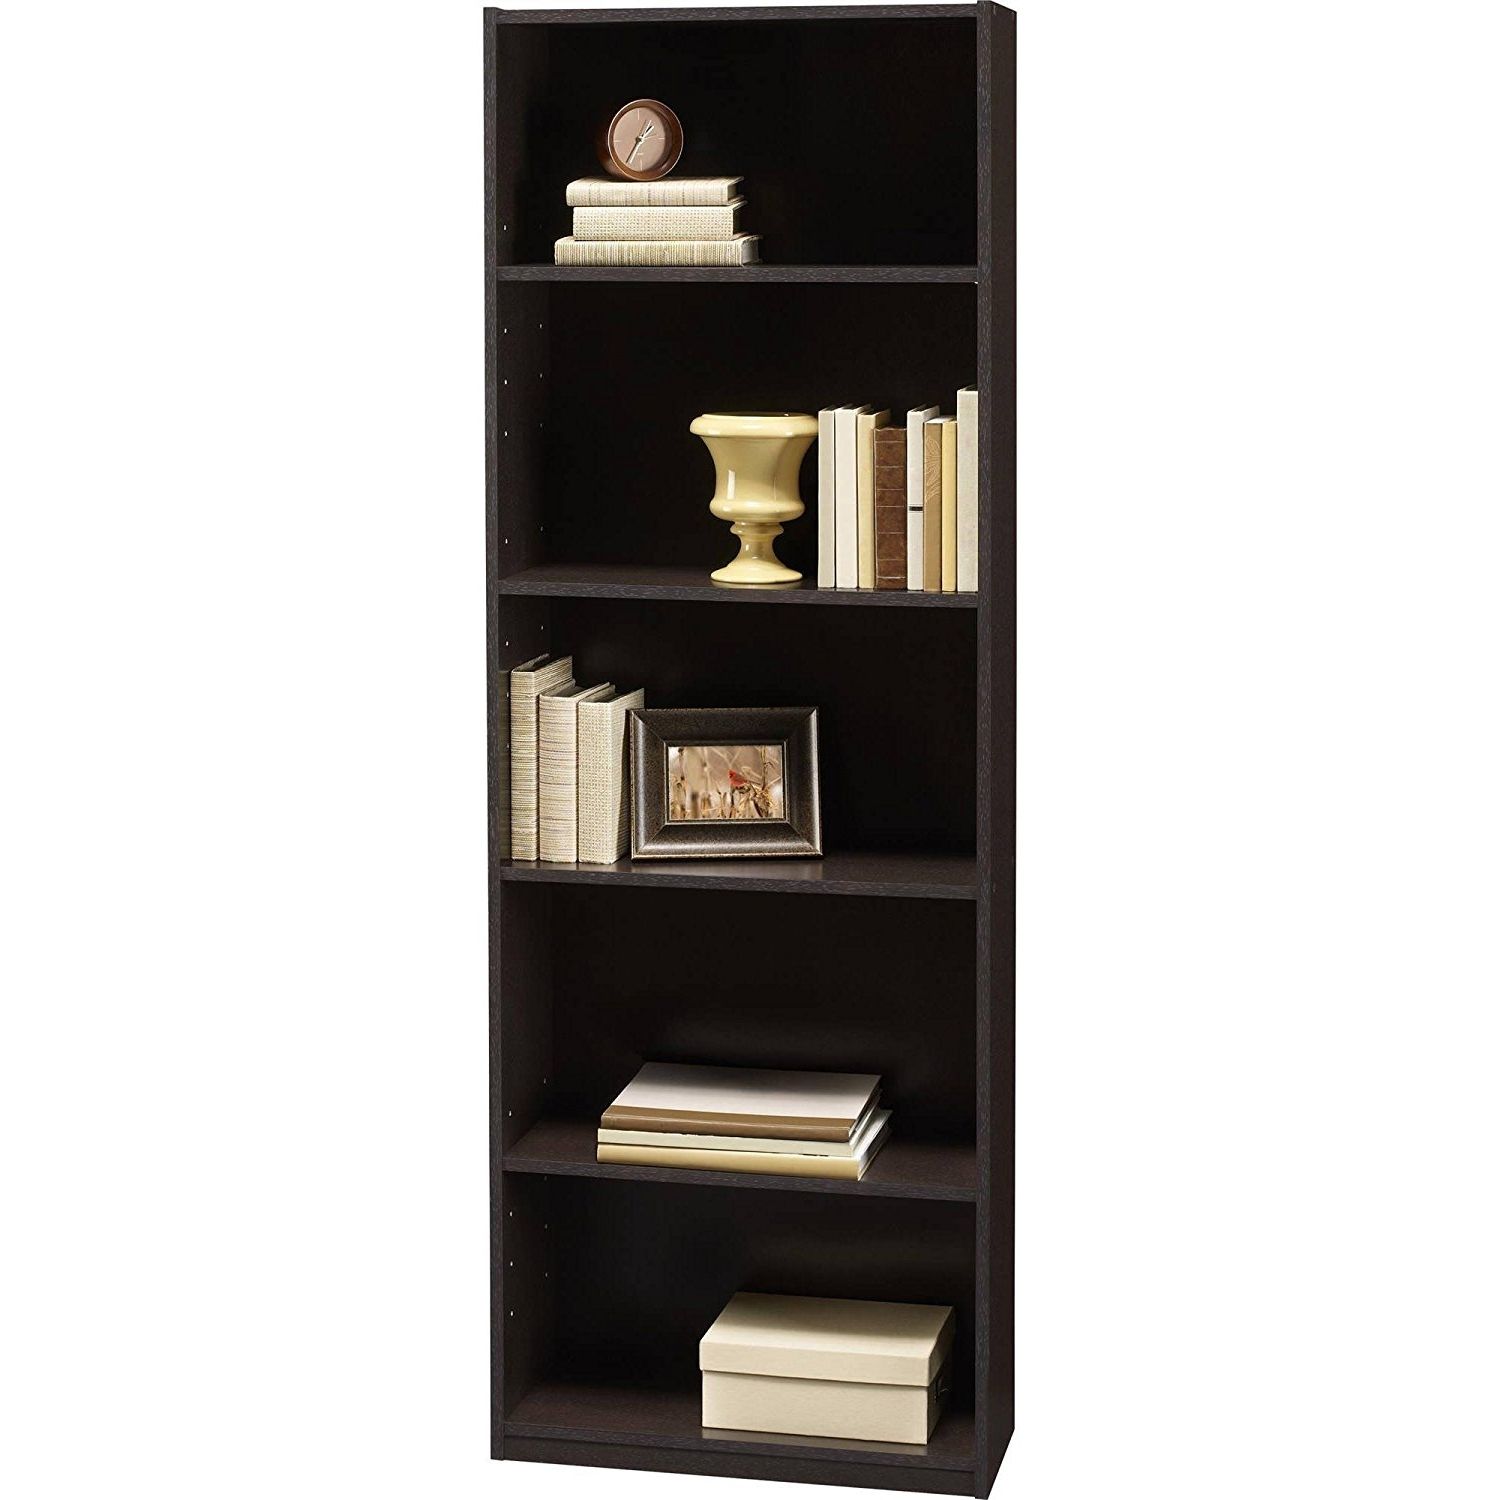 Amazon: Ameriwood 5 Shelf Bookcases, Set Of 2, Espresso Pertaining To Most Recent Target 5 Shelf Bookcases (View 12 of 15)